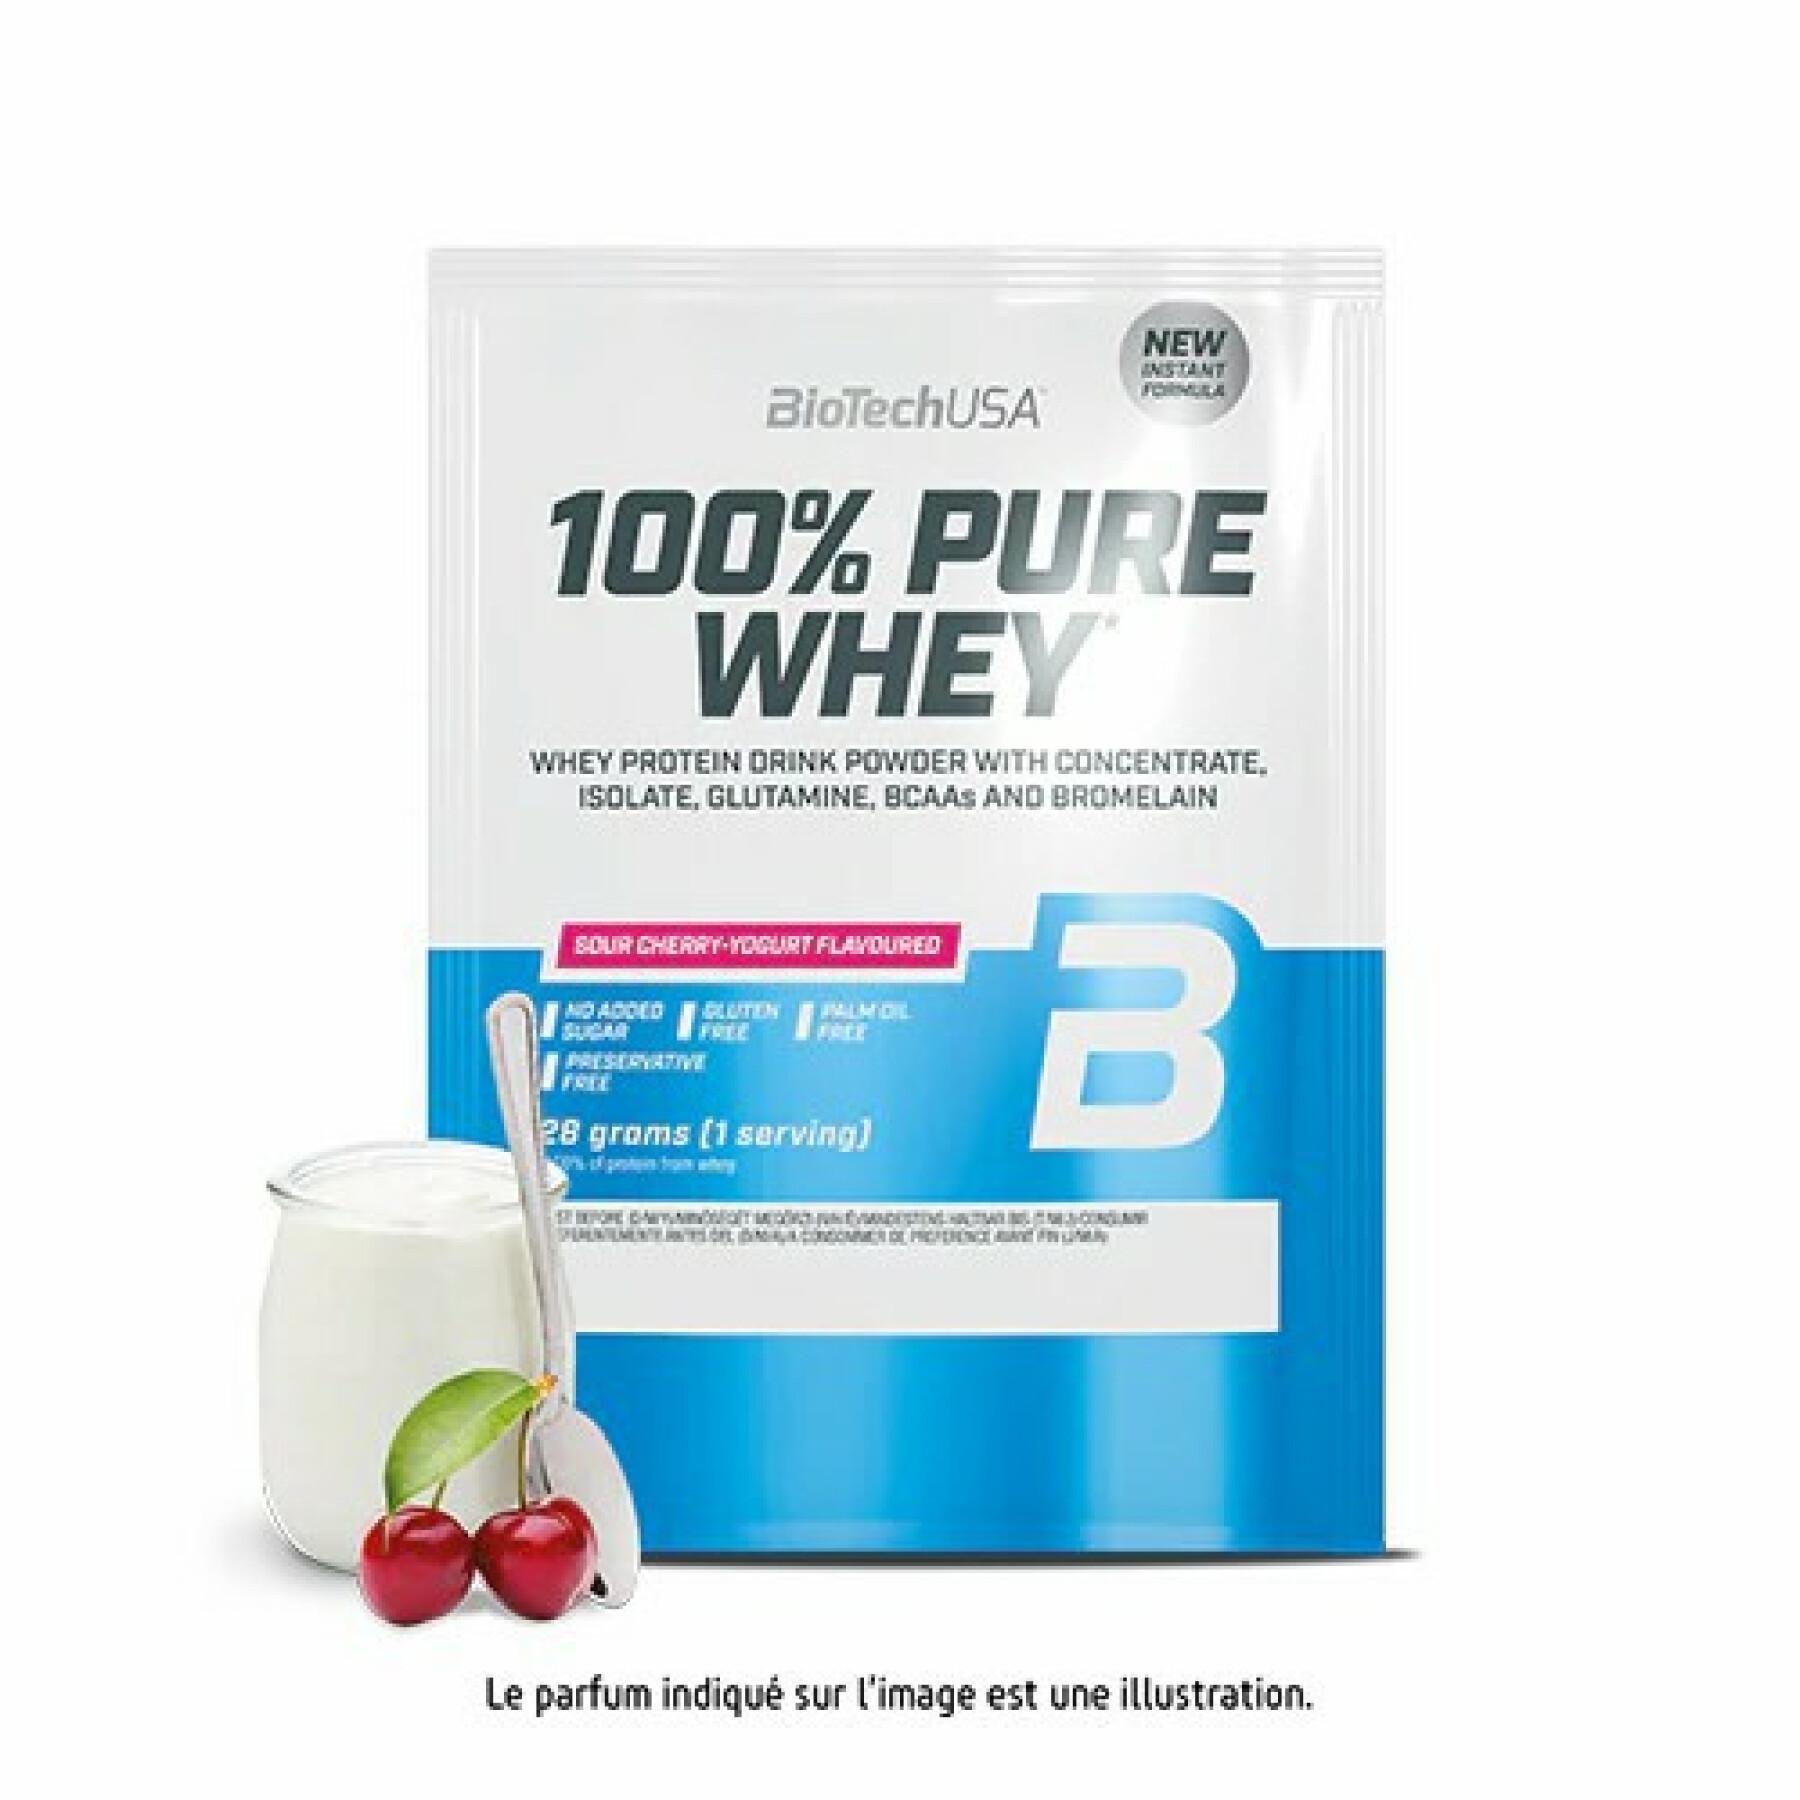 50 packets of 100% pure whey protein Biotech USA - Cerise yaourt - 28g